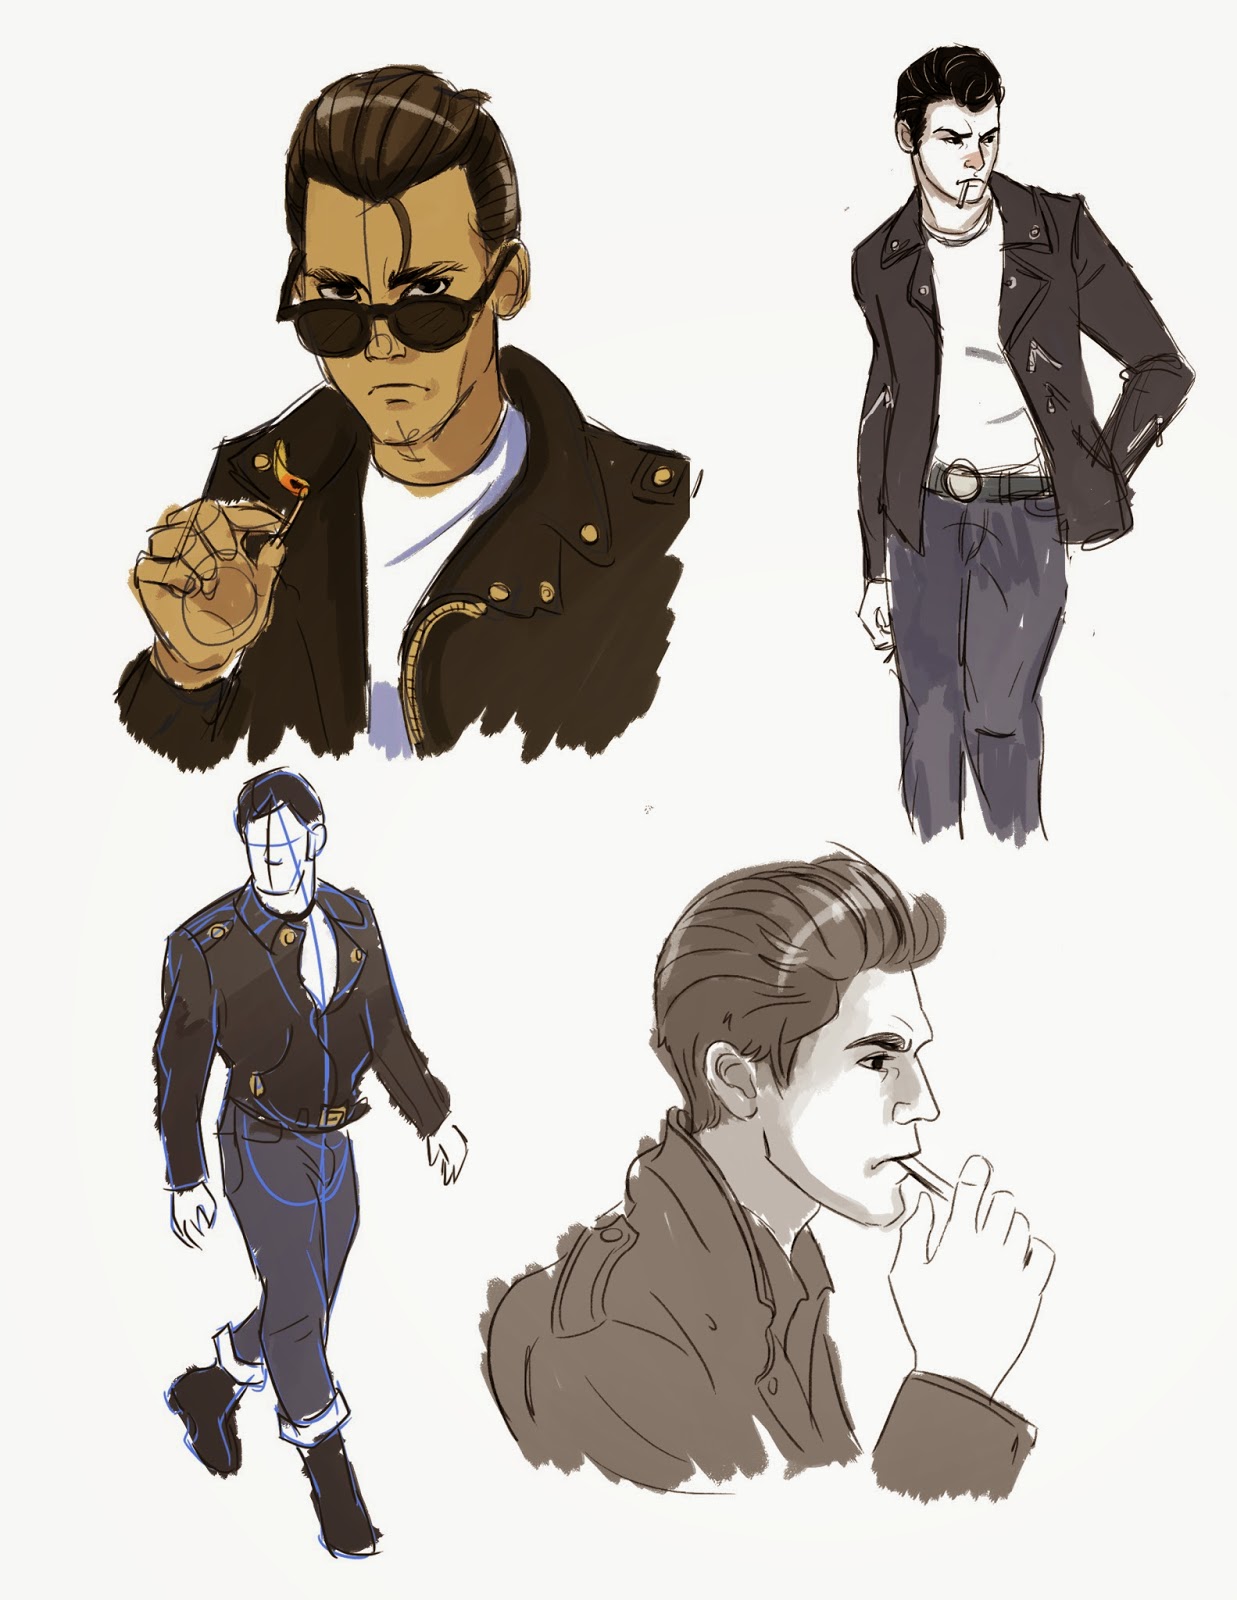 1237x1600 sweet character design duncan the greaser - Greaser Drawing.